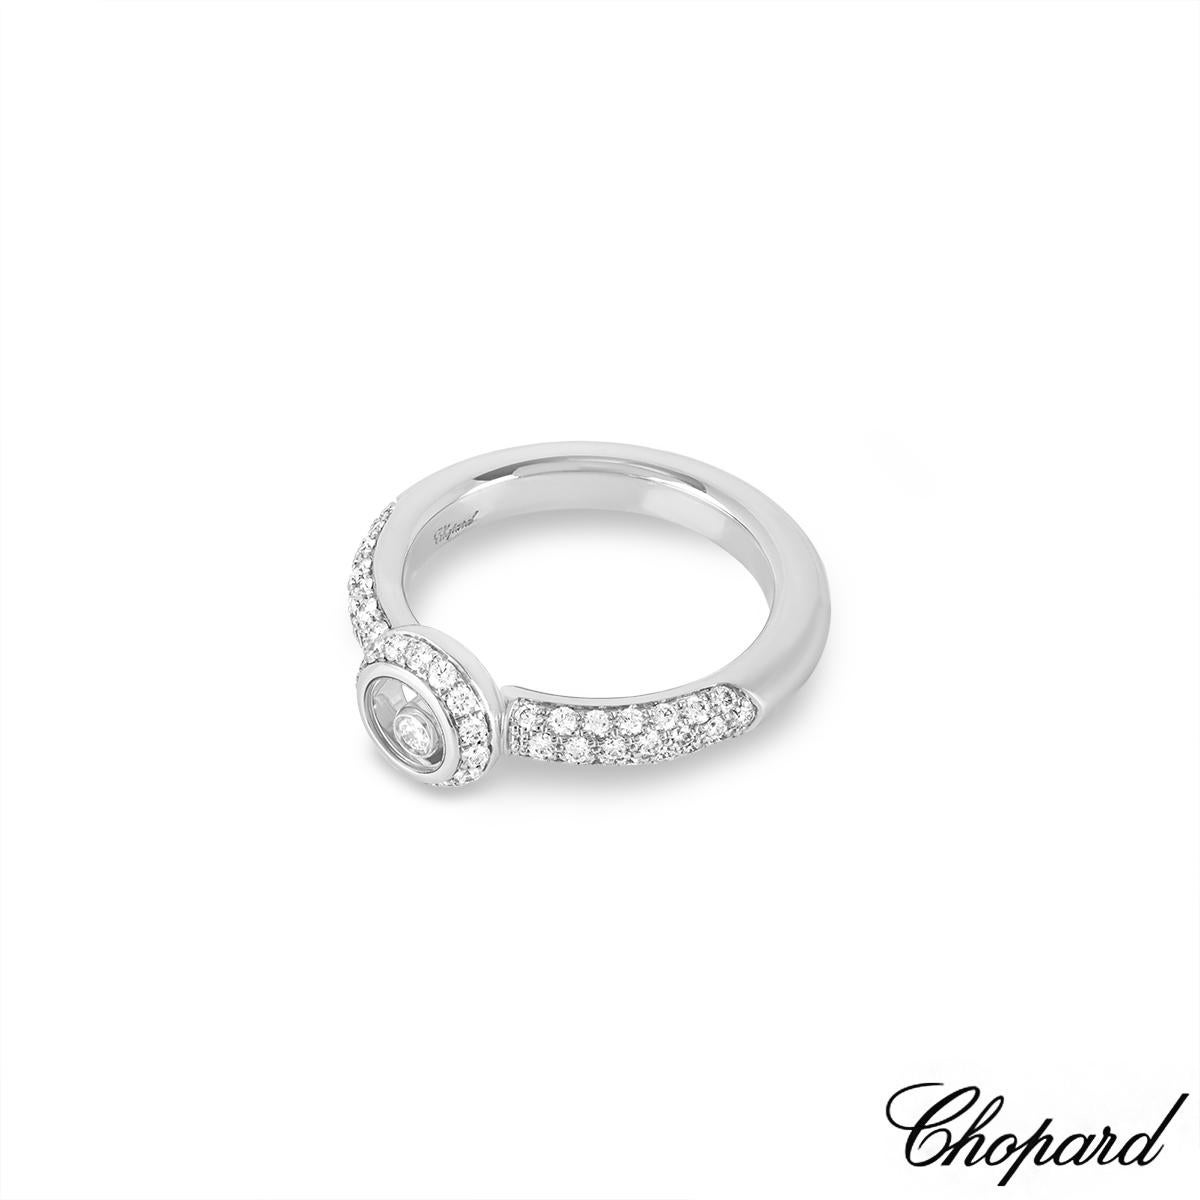 Chopard White Gold Happy Diamonds Ring 82/2902-1110 In Excellent Condition For Sale In London, GB